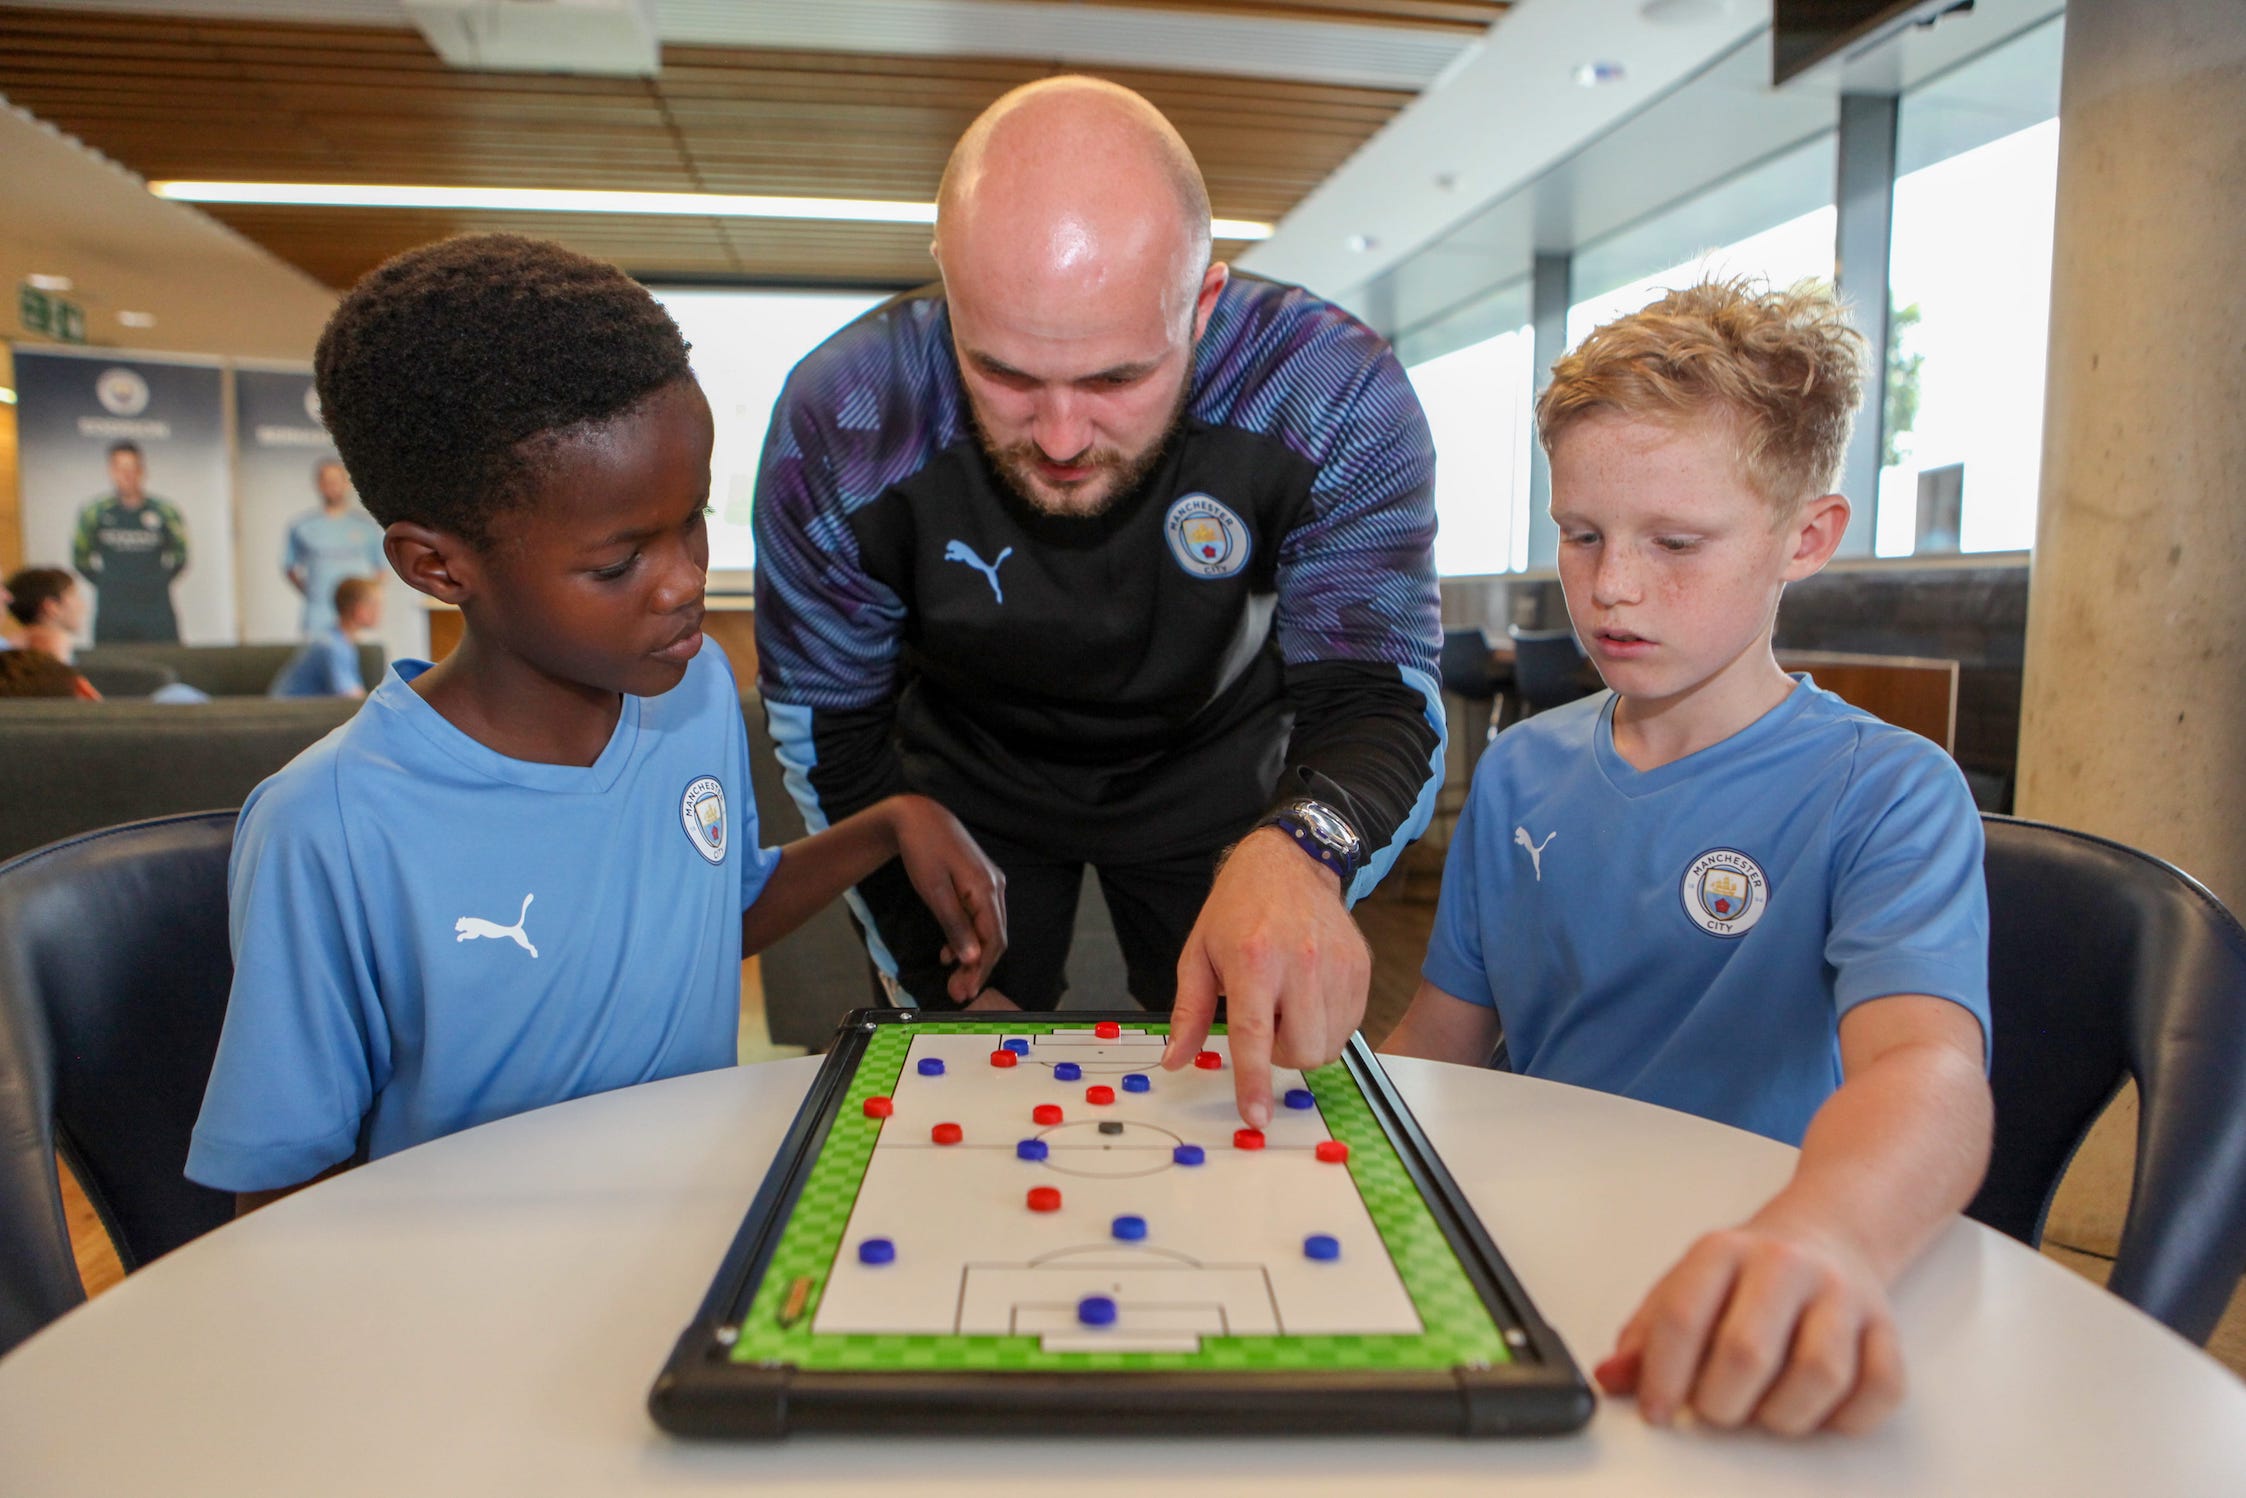 Two young boys on the Football Development Programme at Manchester City Football School. They are sat looking at a whiteboard on the table in front of them whilst their coach is crouching down in between them and pointing at the board.